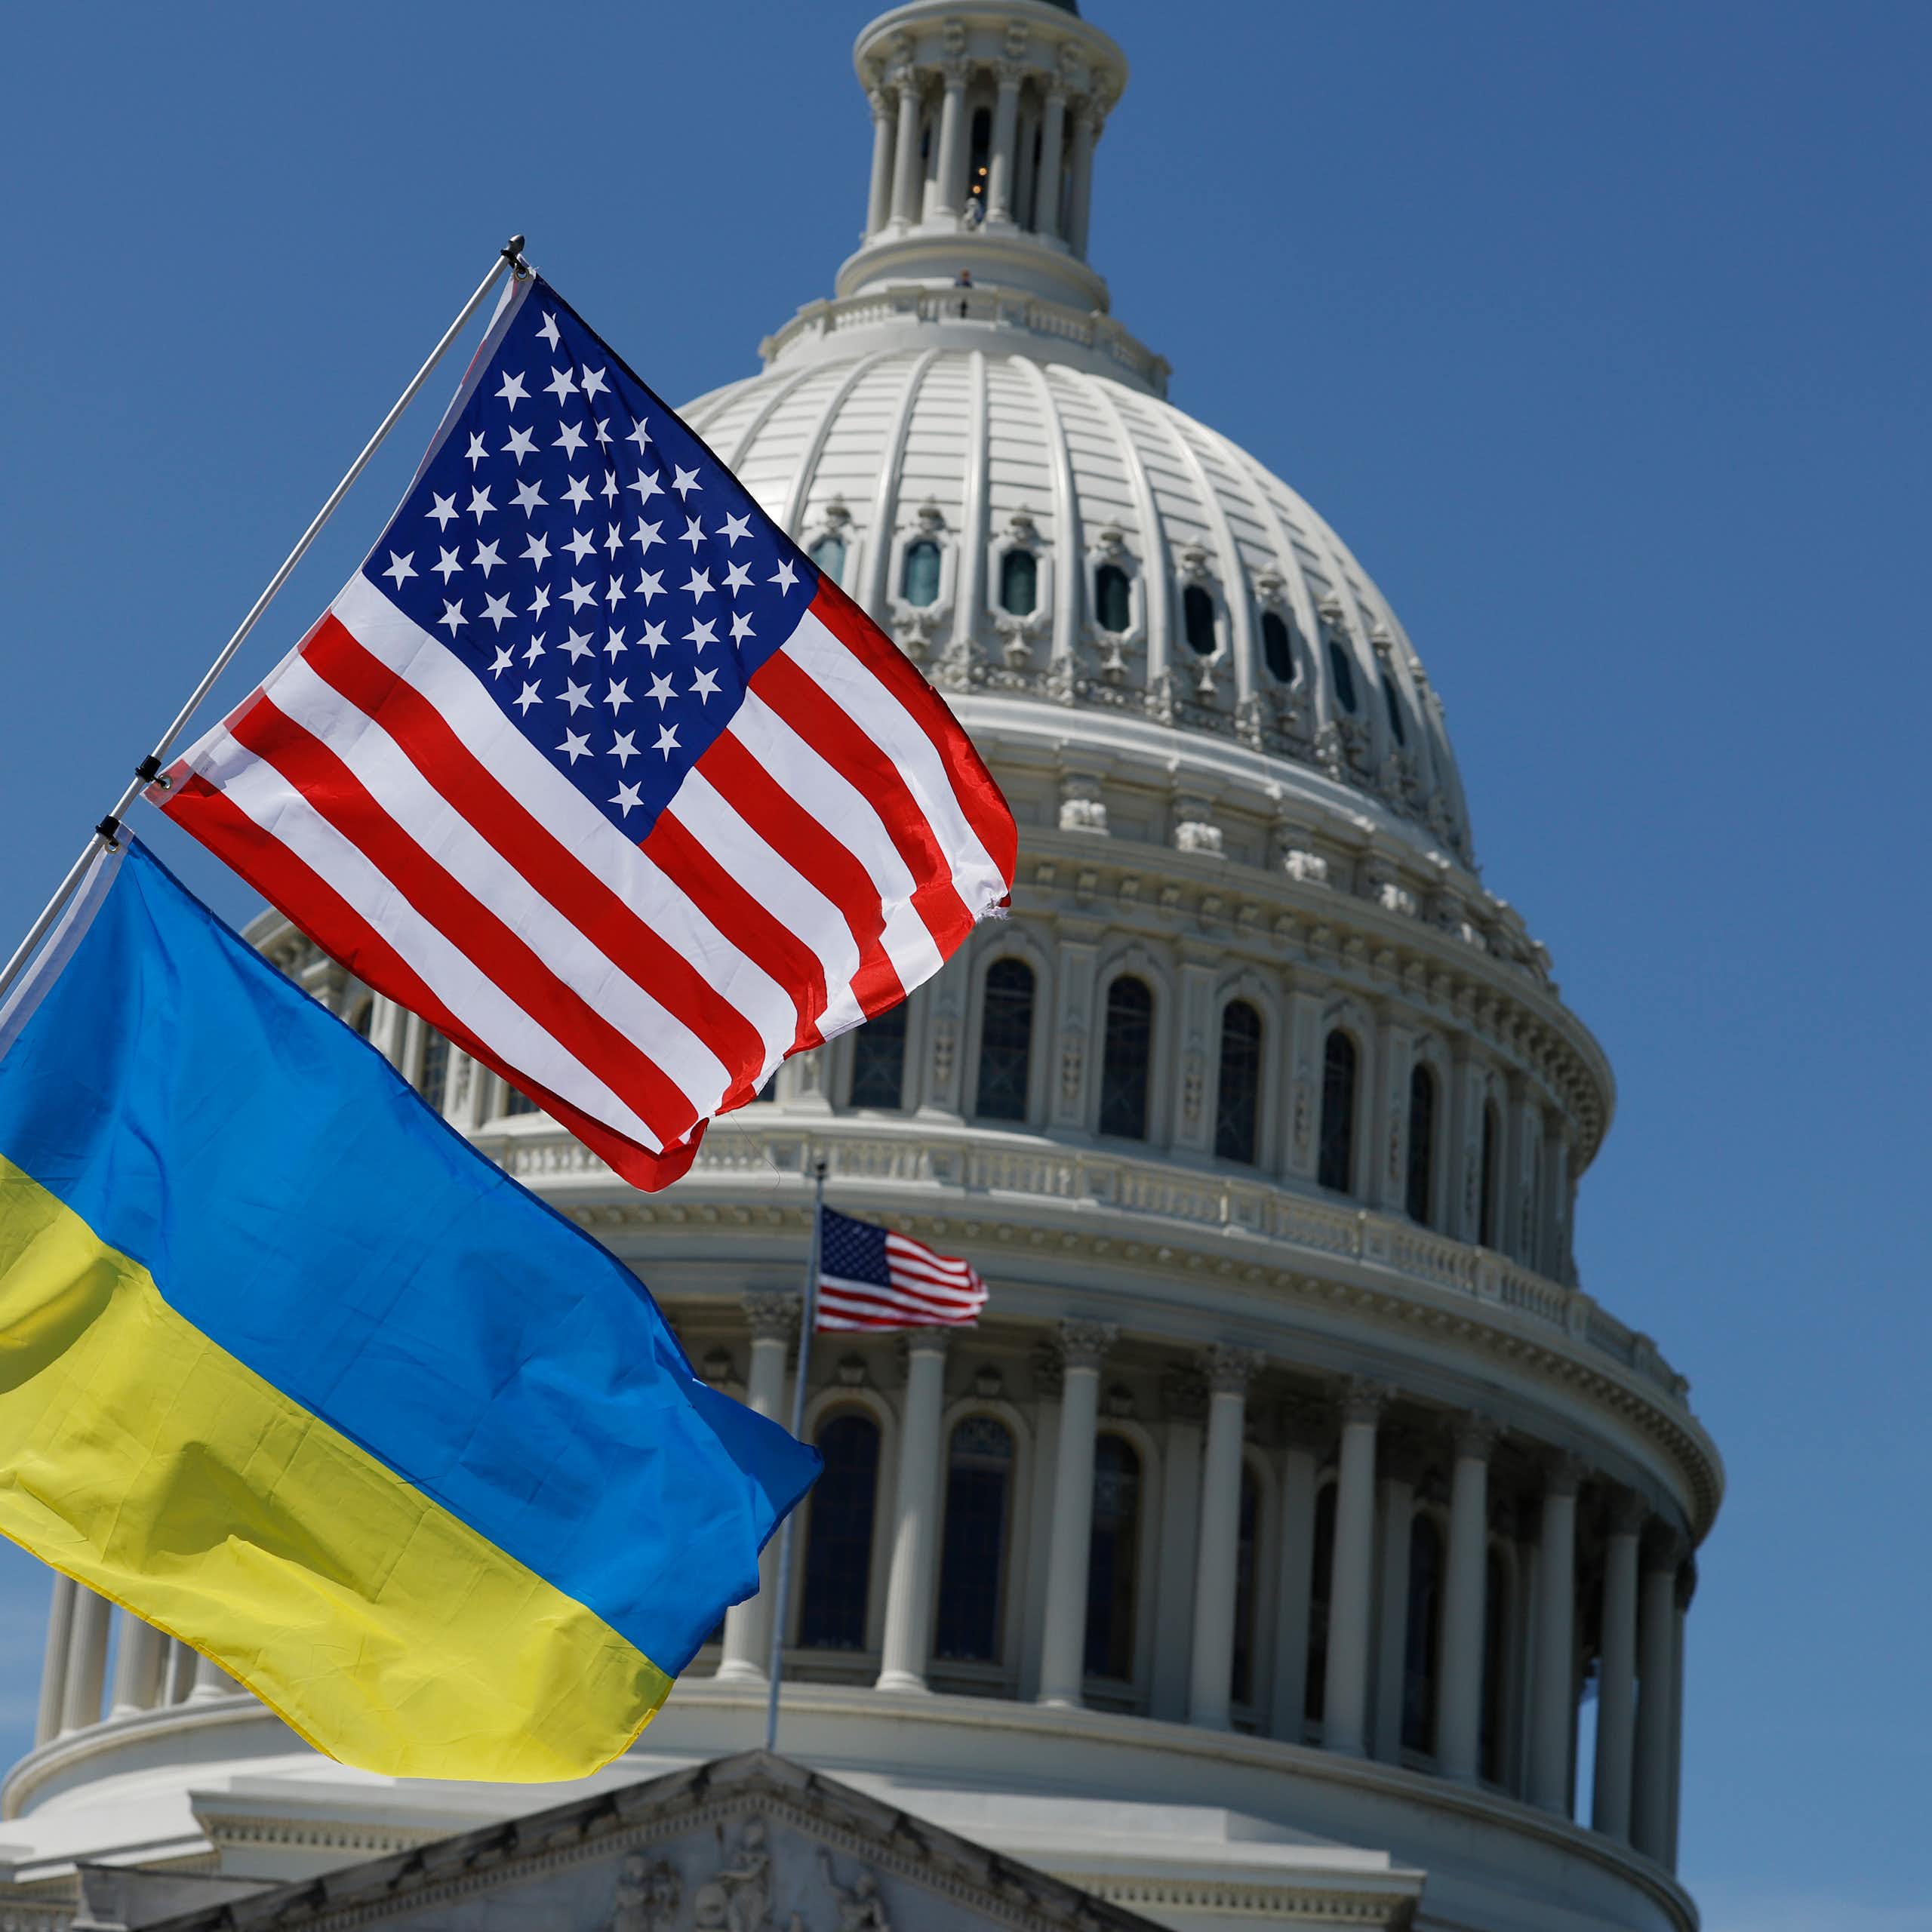 A blue and yellow flag rests on a poll below an American flag, in front of the top of the Capitol building dome. There is a bright blue sky behind the building.